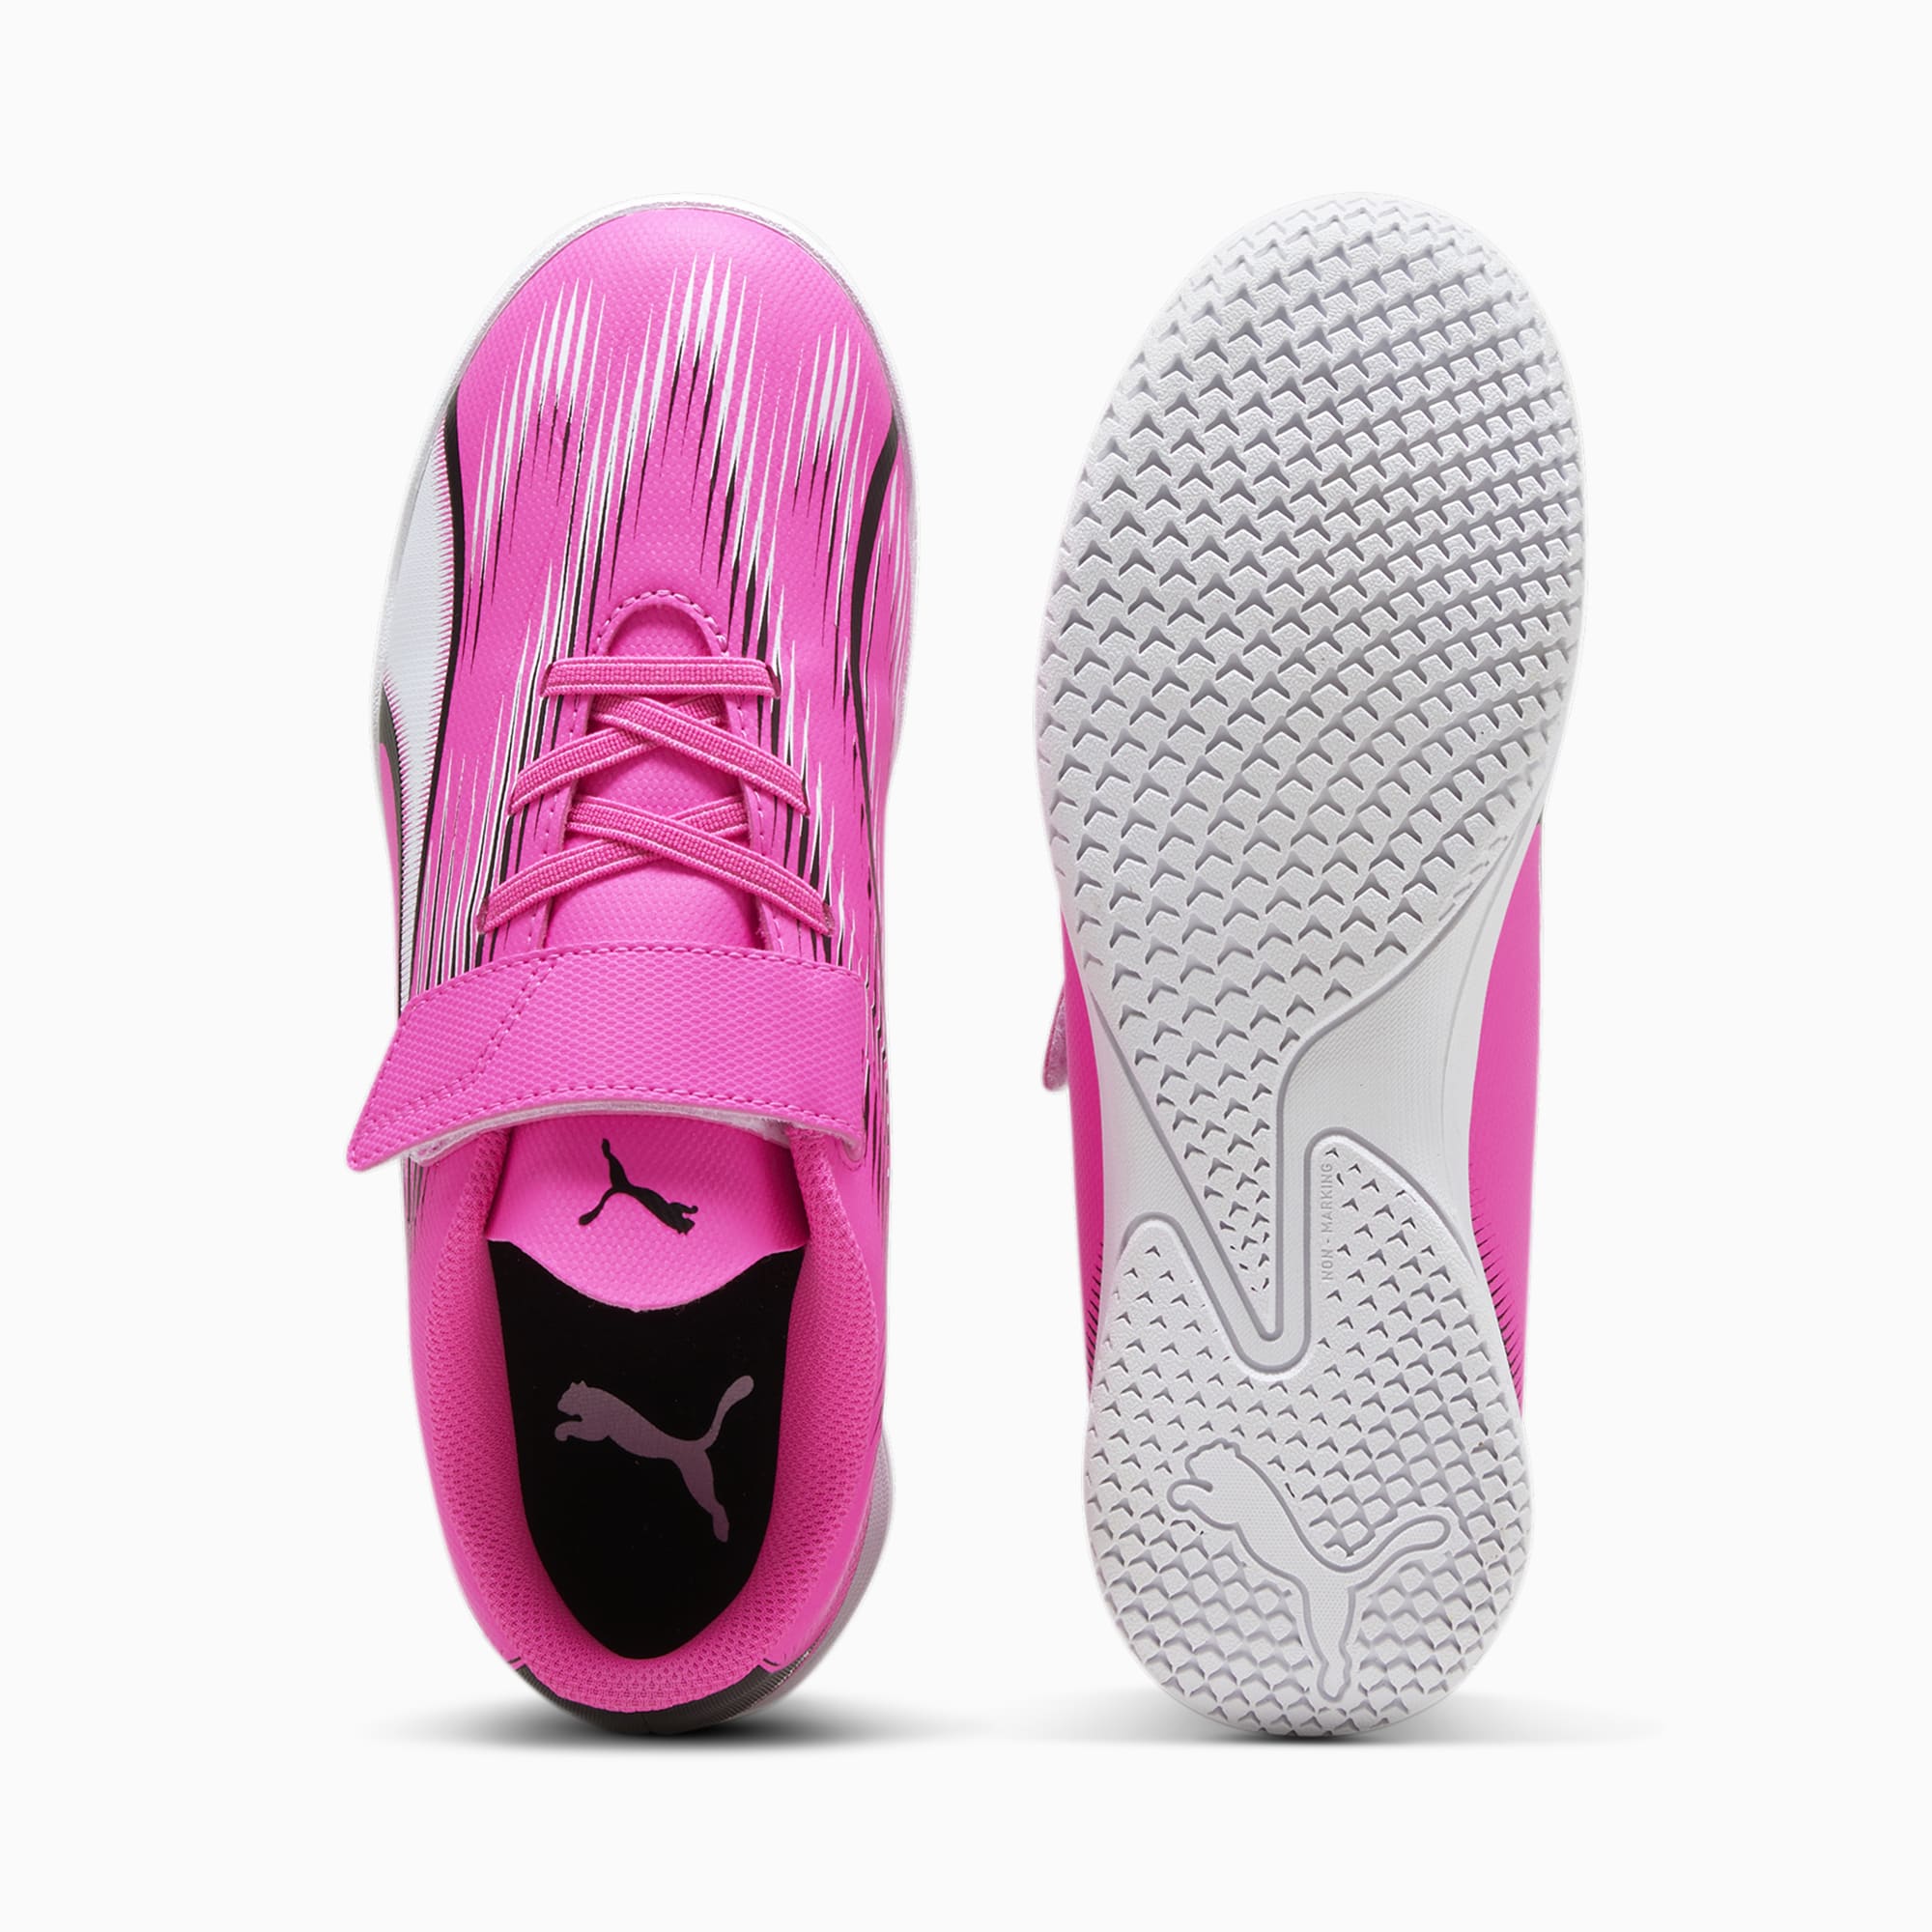 PUMA Ultra Play IT Youth Football Boots, Poison Pink/White/Black